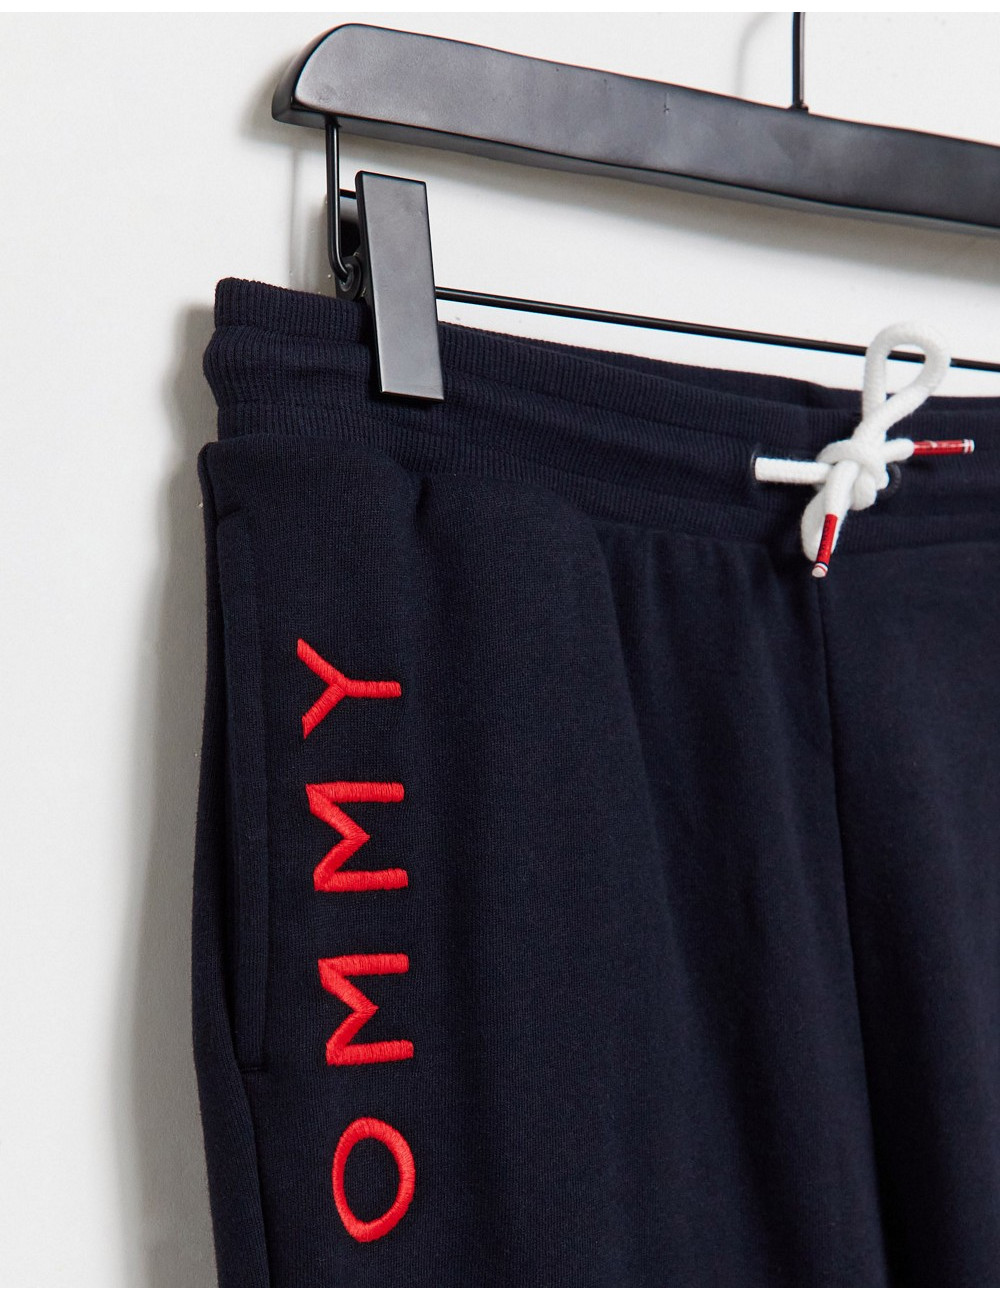 Tommy Hilfiger embroidery...